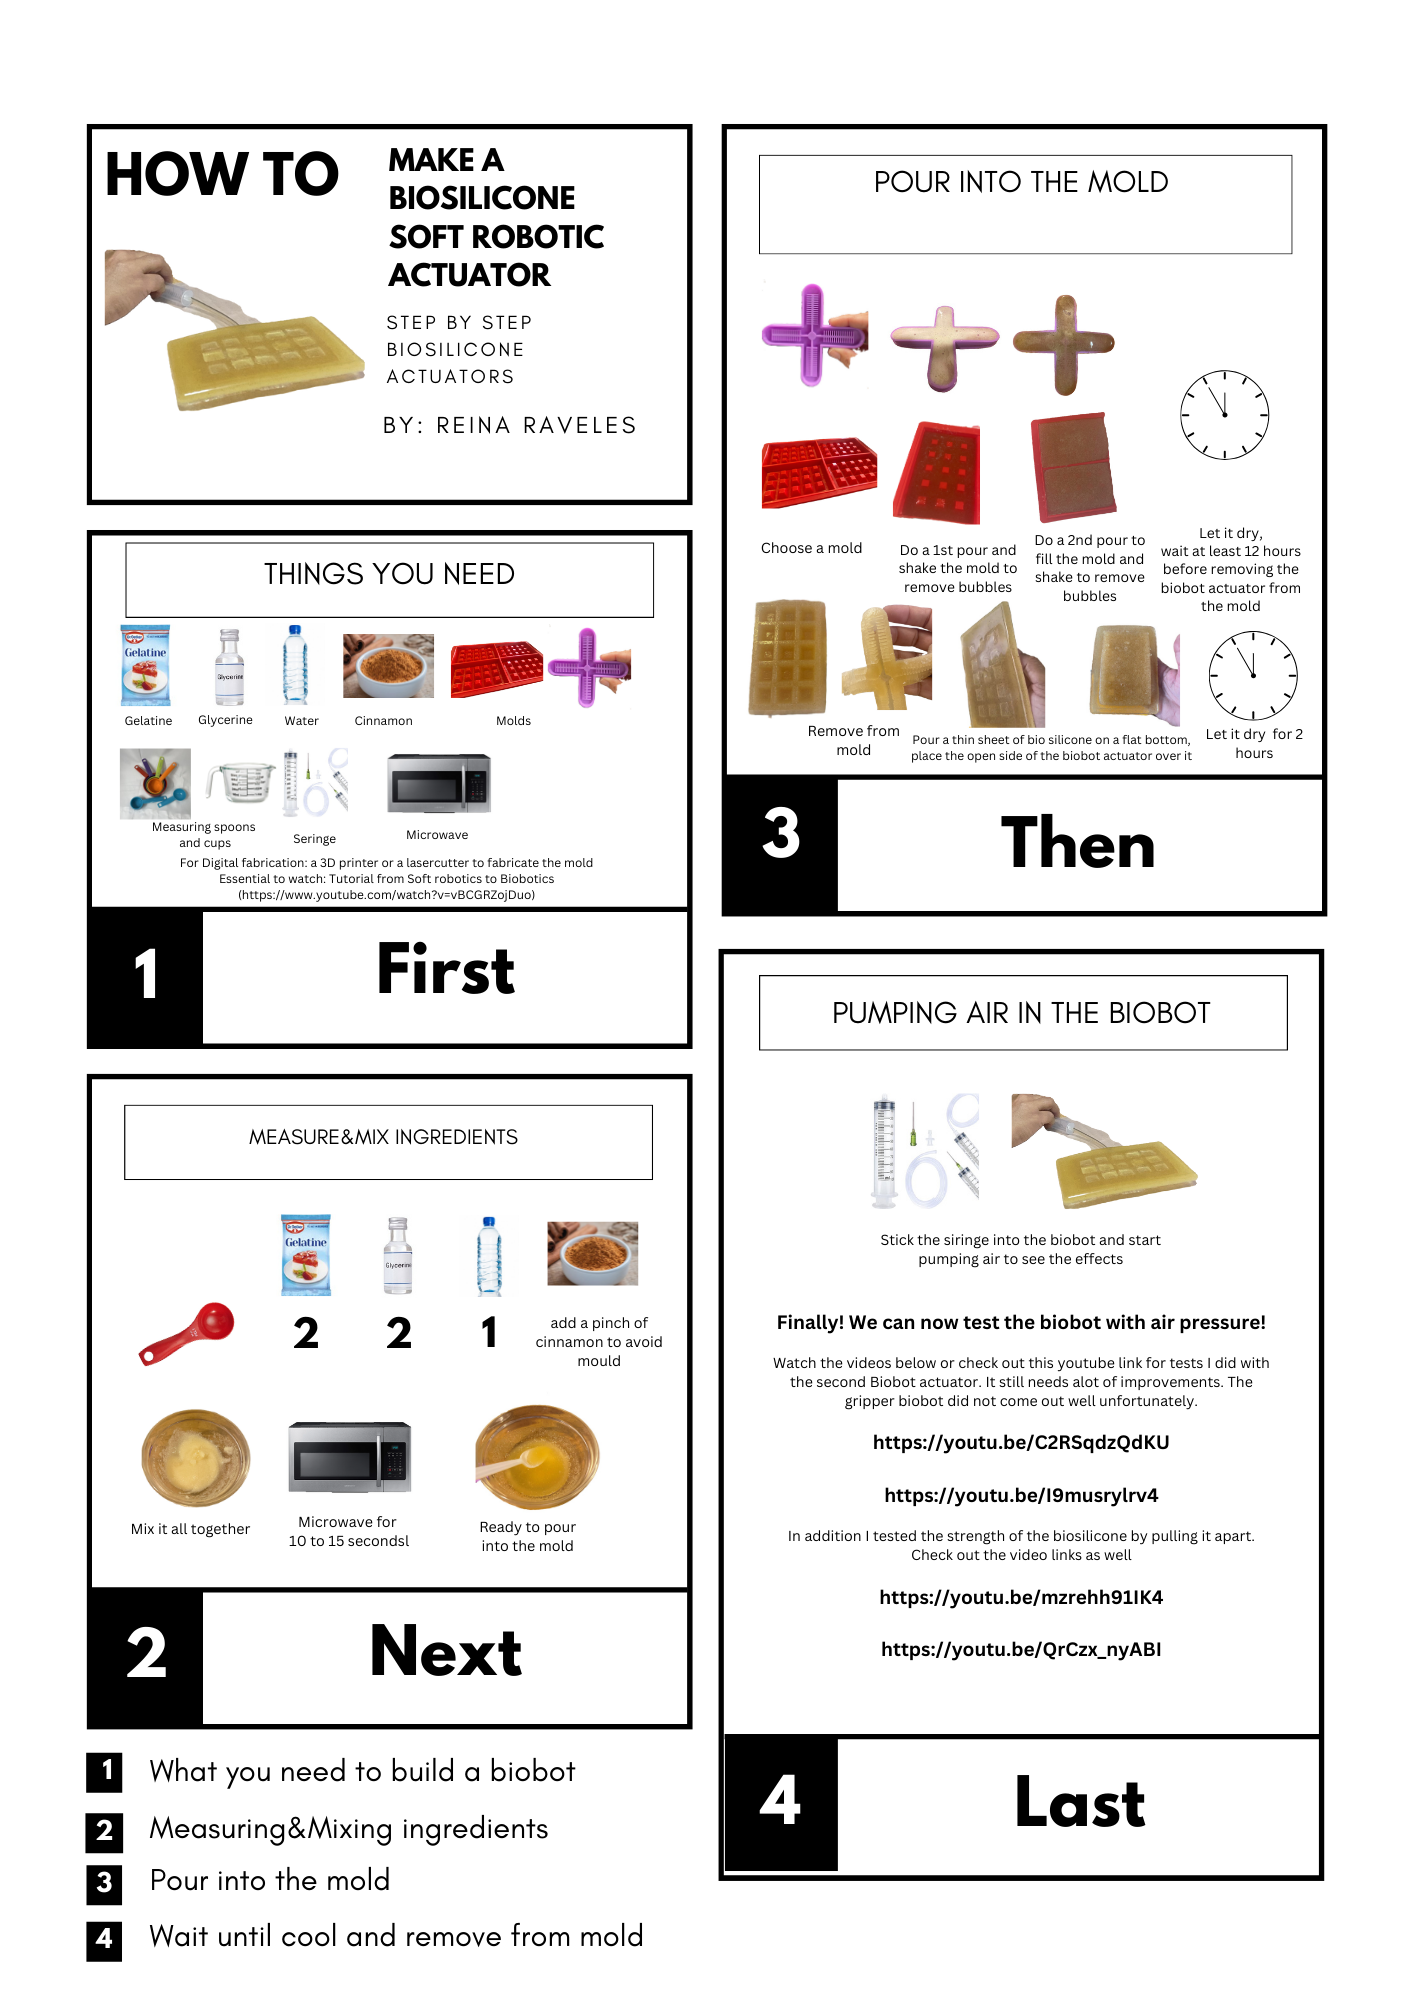 Step by step instruction on how to build a Biobot from bio silicone